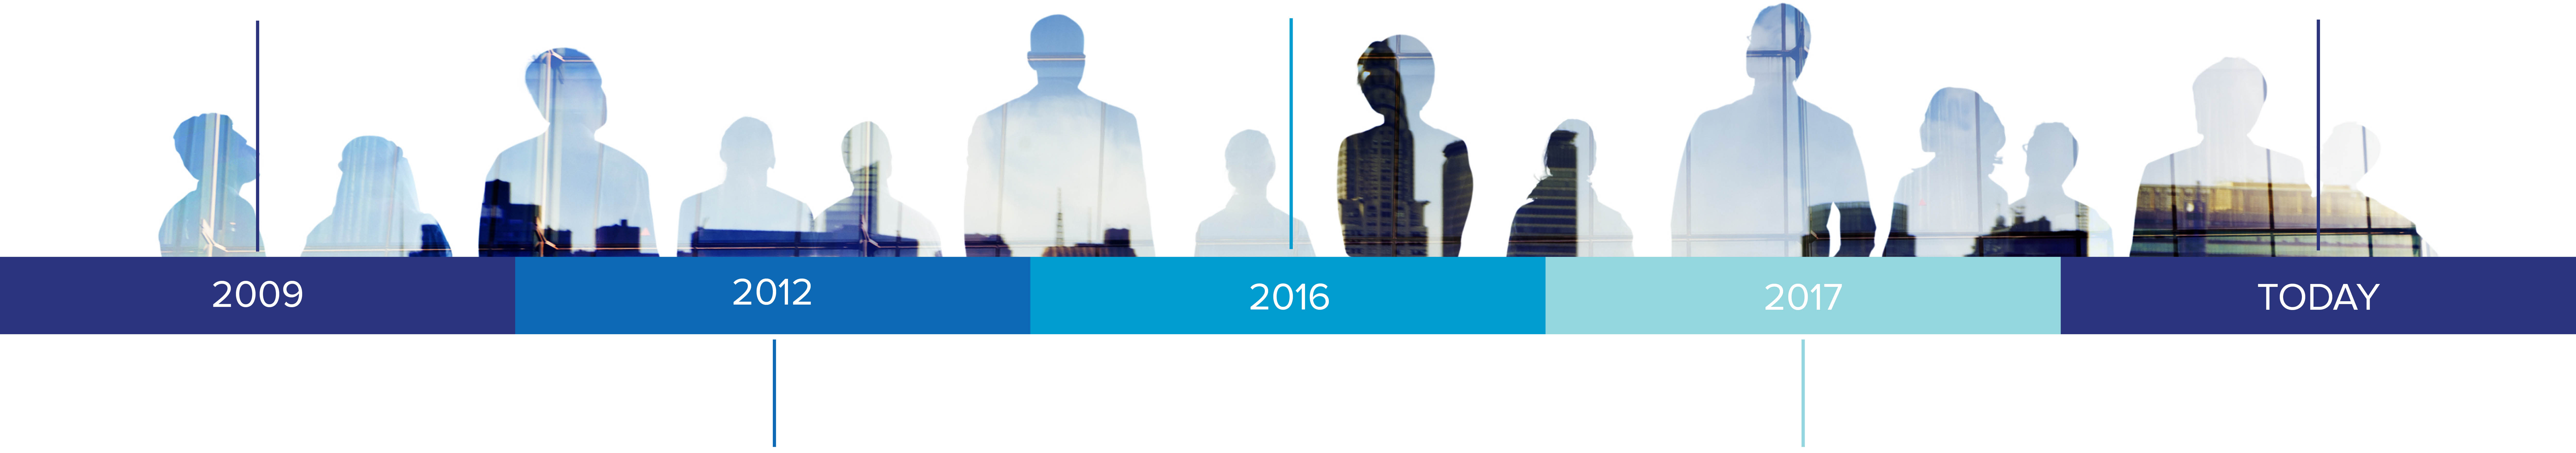 Timeline image with 2009-TODAY and silhouettes of people filled in with building images